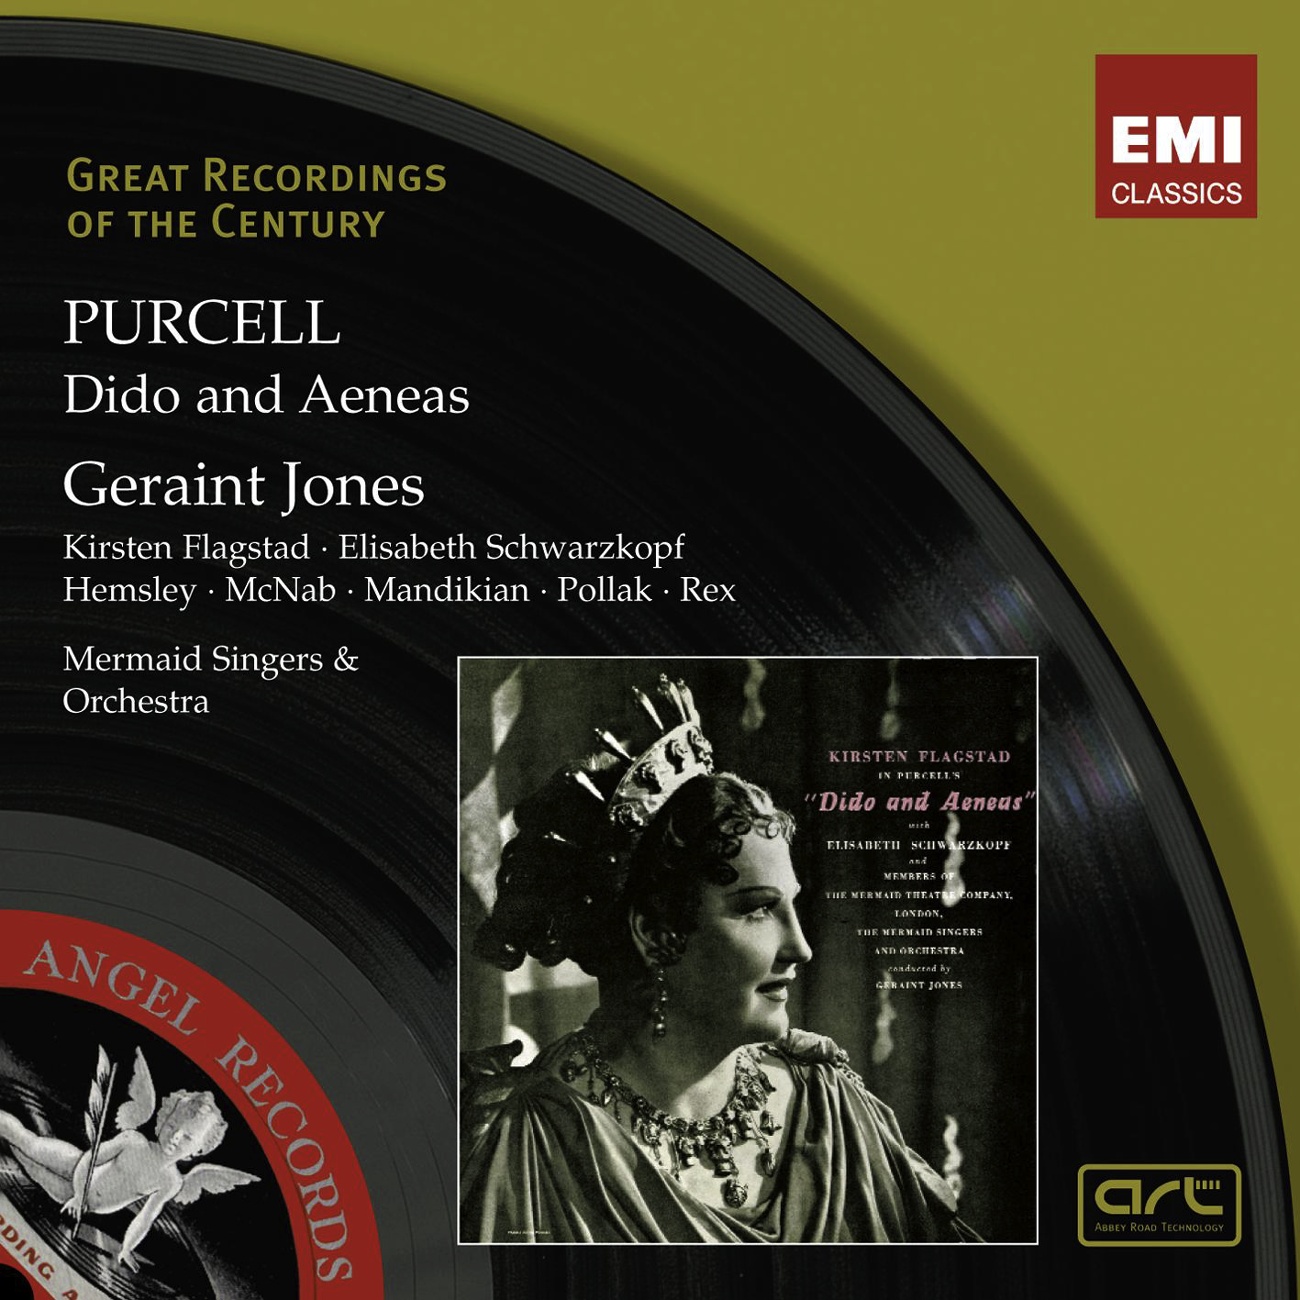 Dido and Aeneas Z626 (ed. Geraint Jones) (2008 Remastered Version), ACT 1: Whence could so much virtue spring? (Dido)